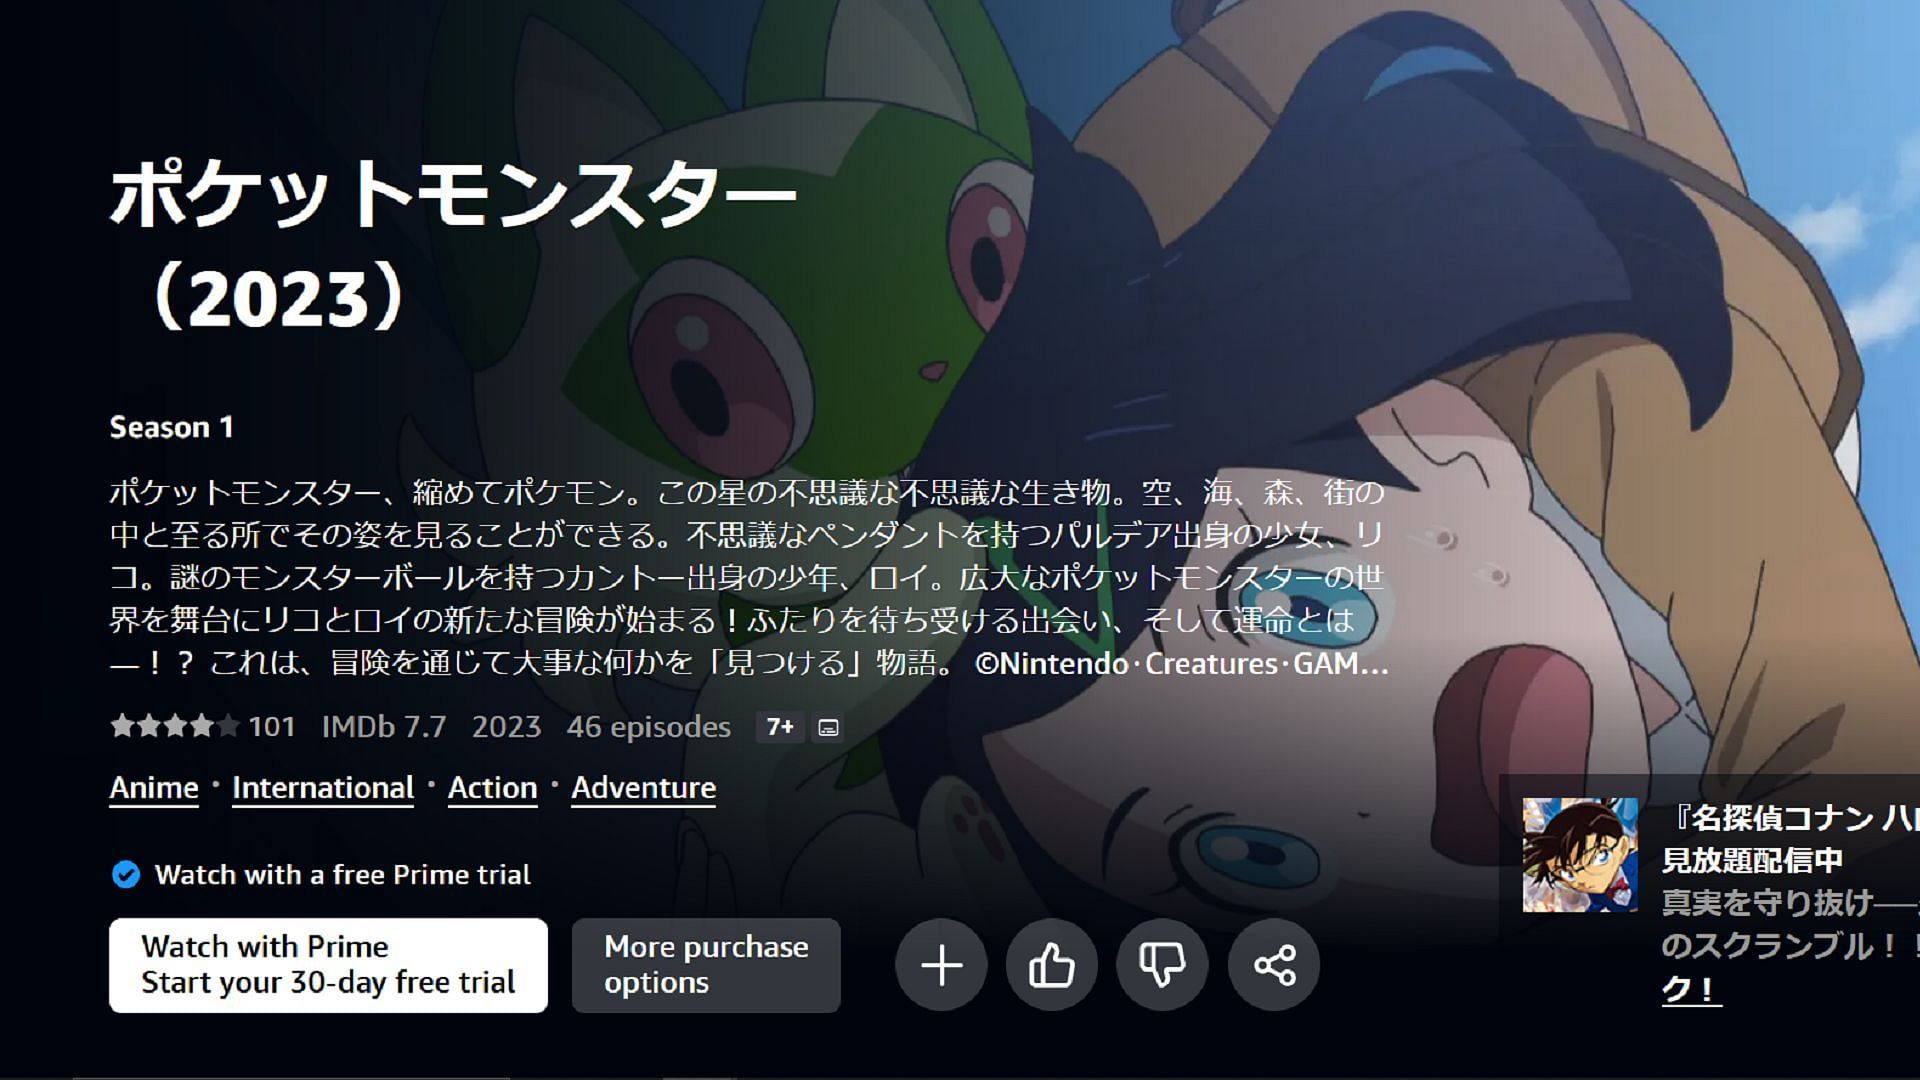 New Pokemon Horizons episodes are rapidly available on Prime Video in Japan (Image via The Pokemon Company/Amazon)